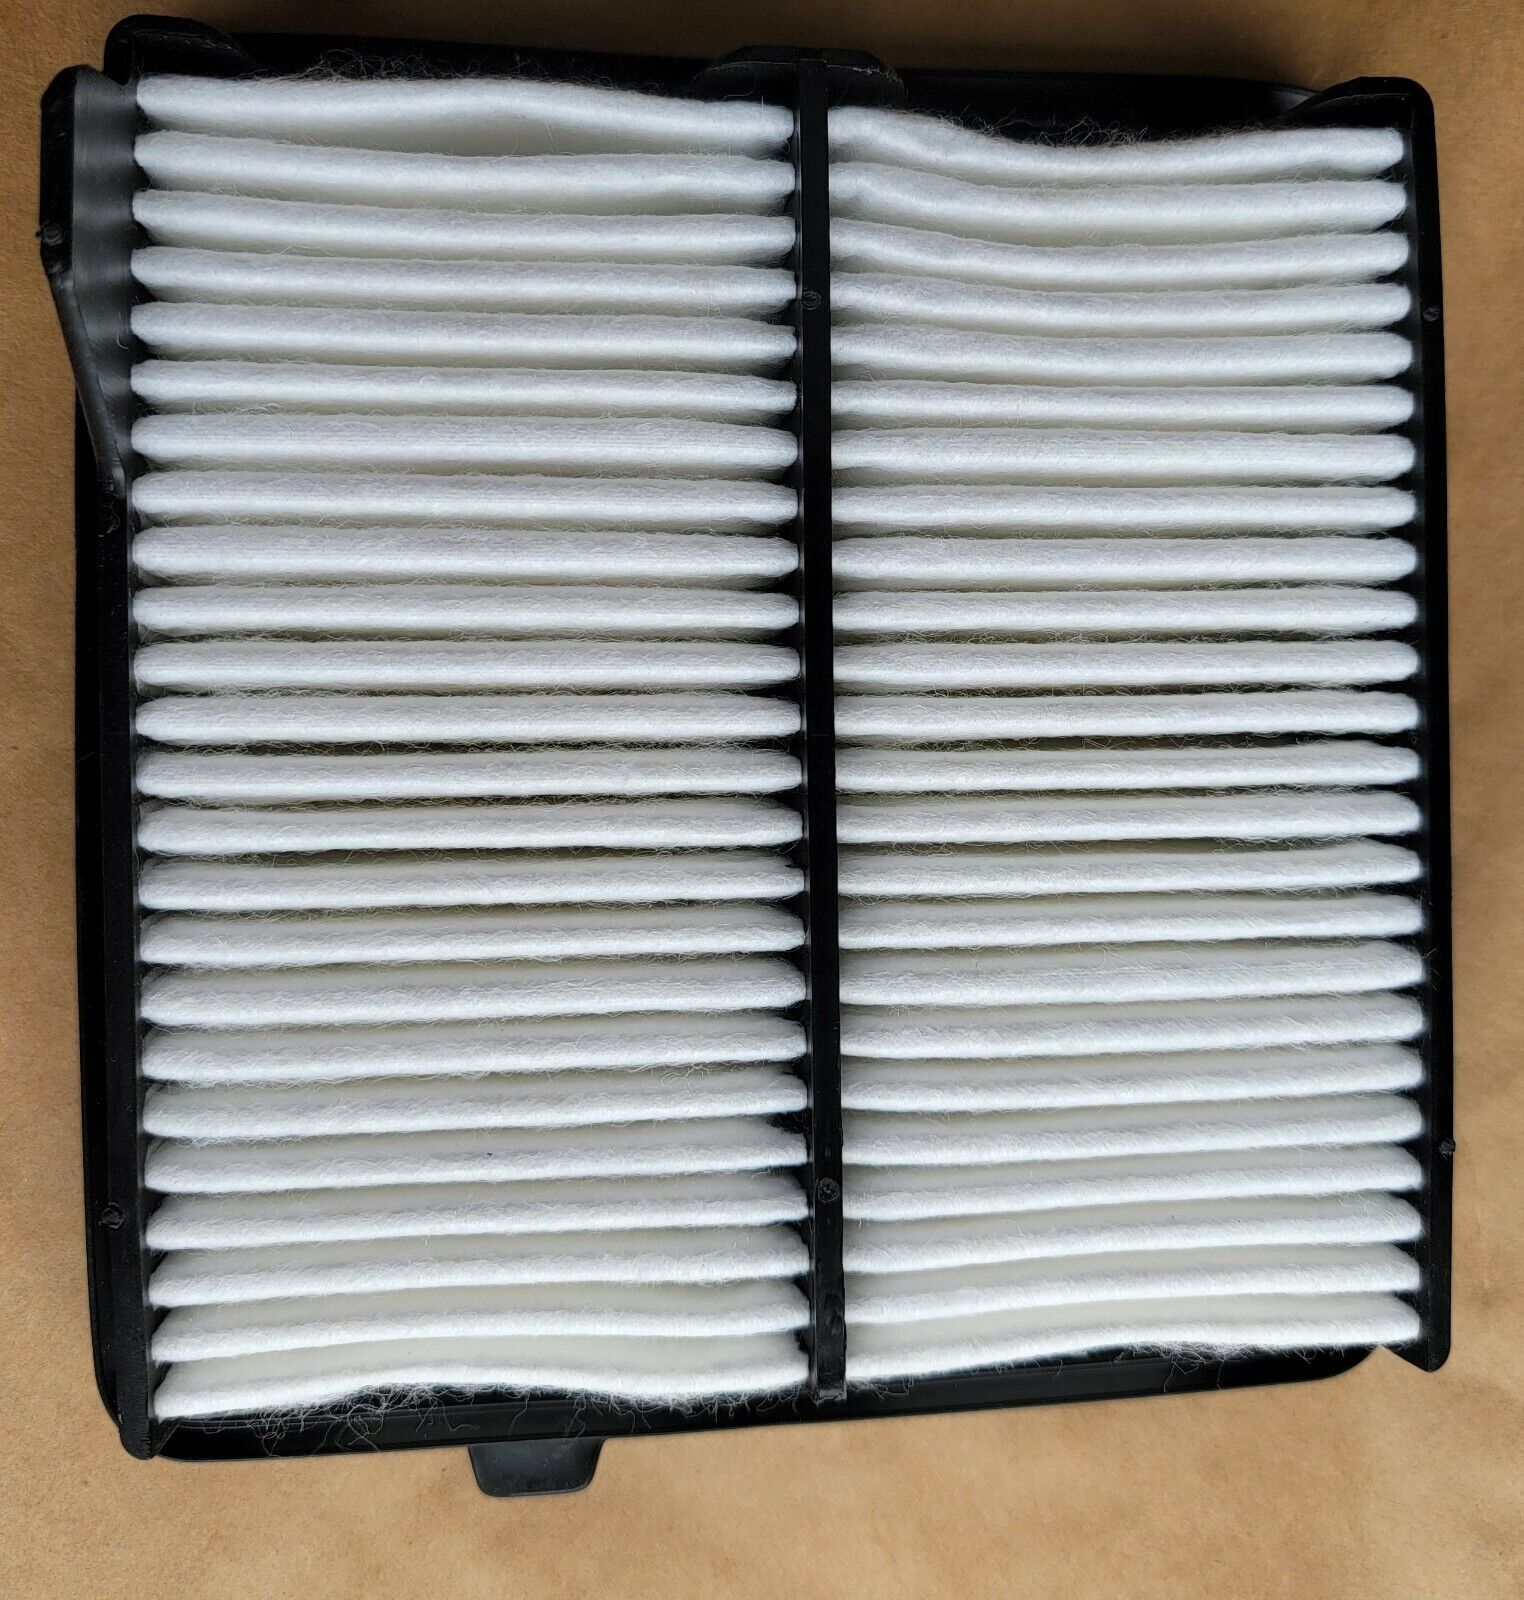 ENGINE AIR FILTER for 2009 - 2014 HONDA FIT